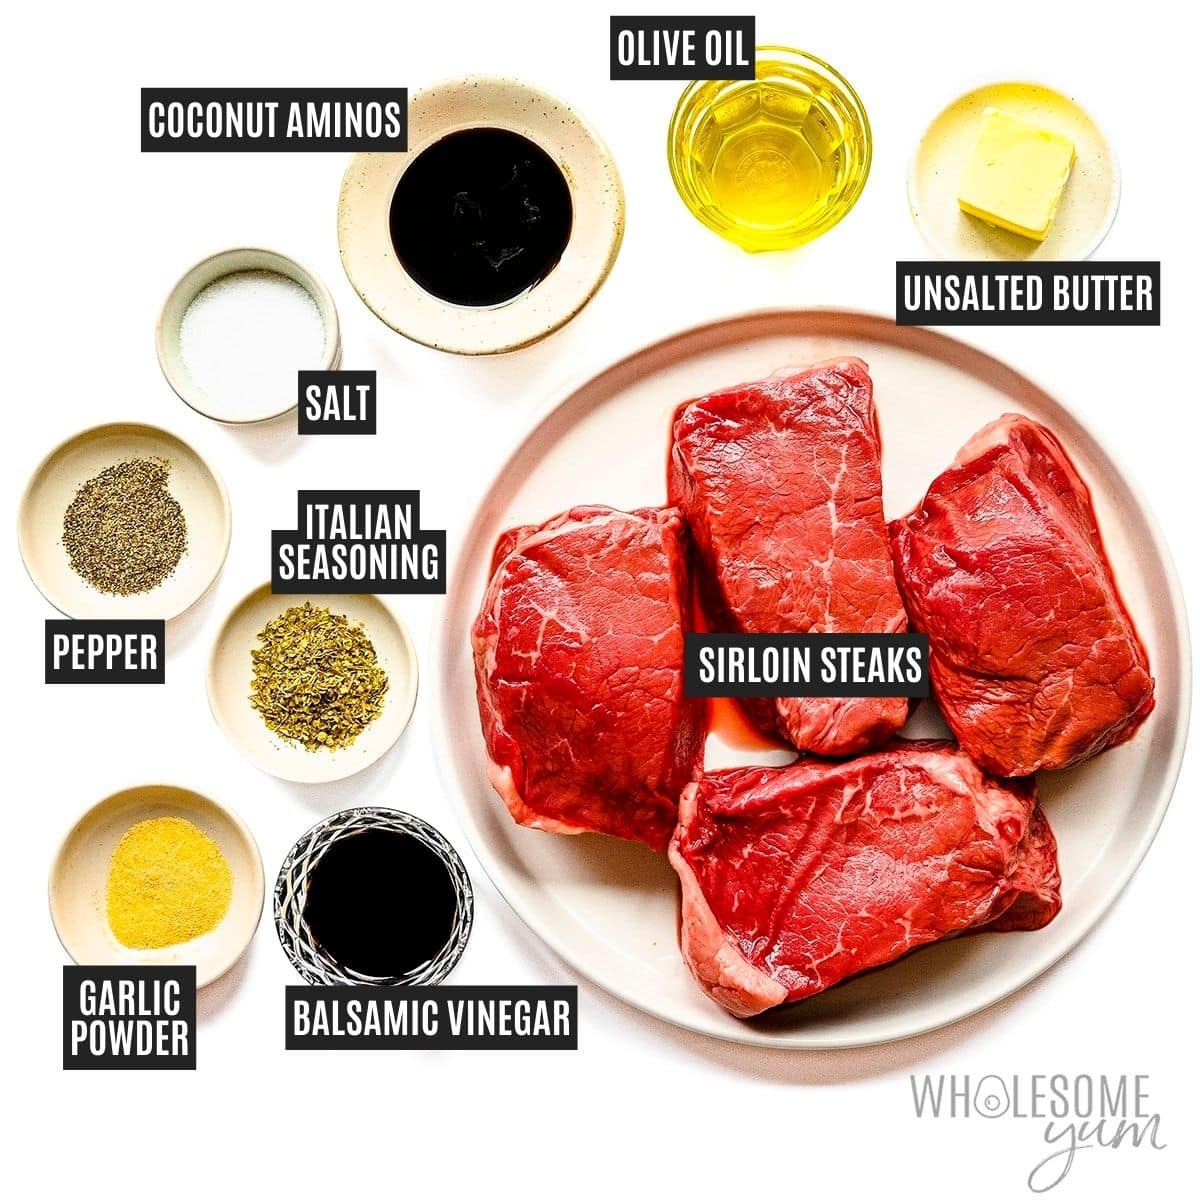 Steaks on a plate next to small bowls of oil, spices, and butter.